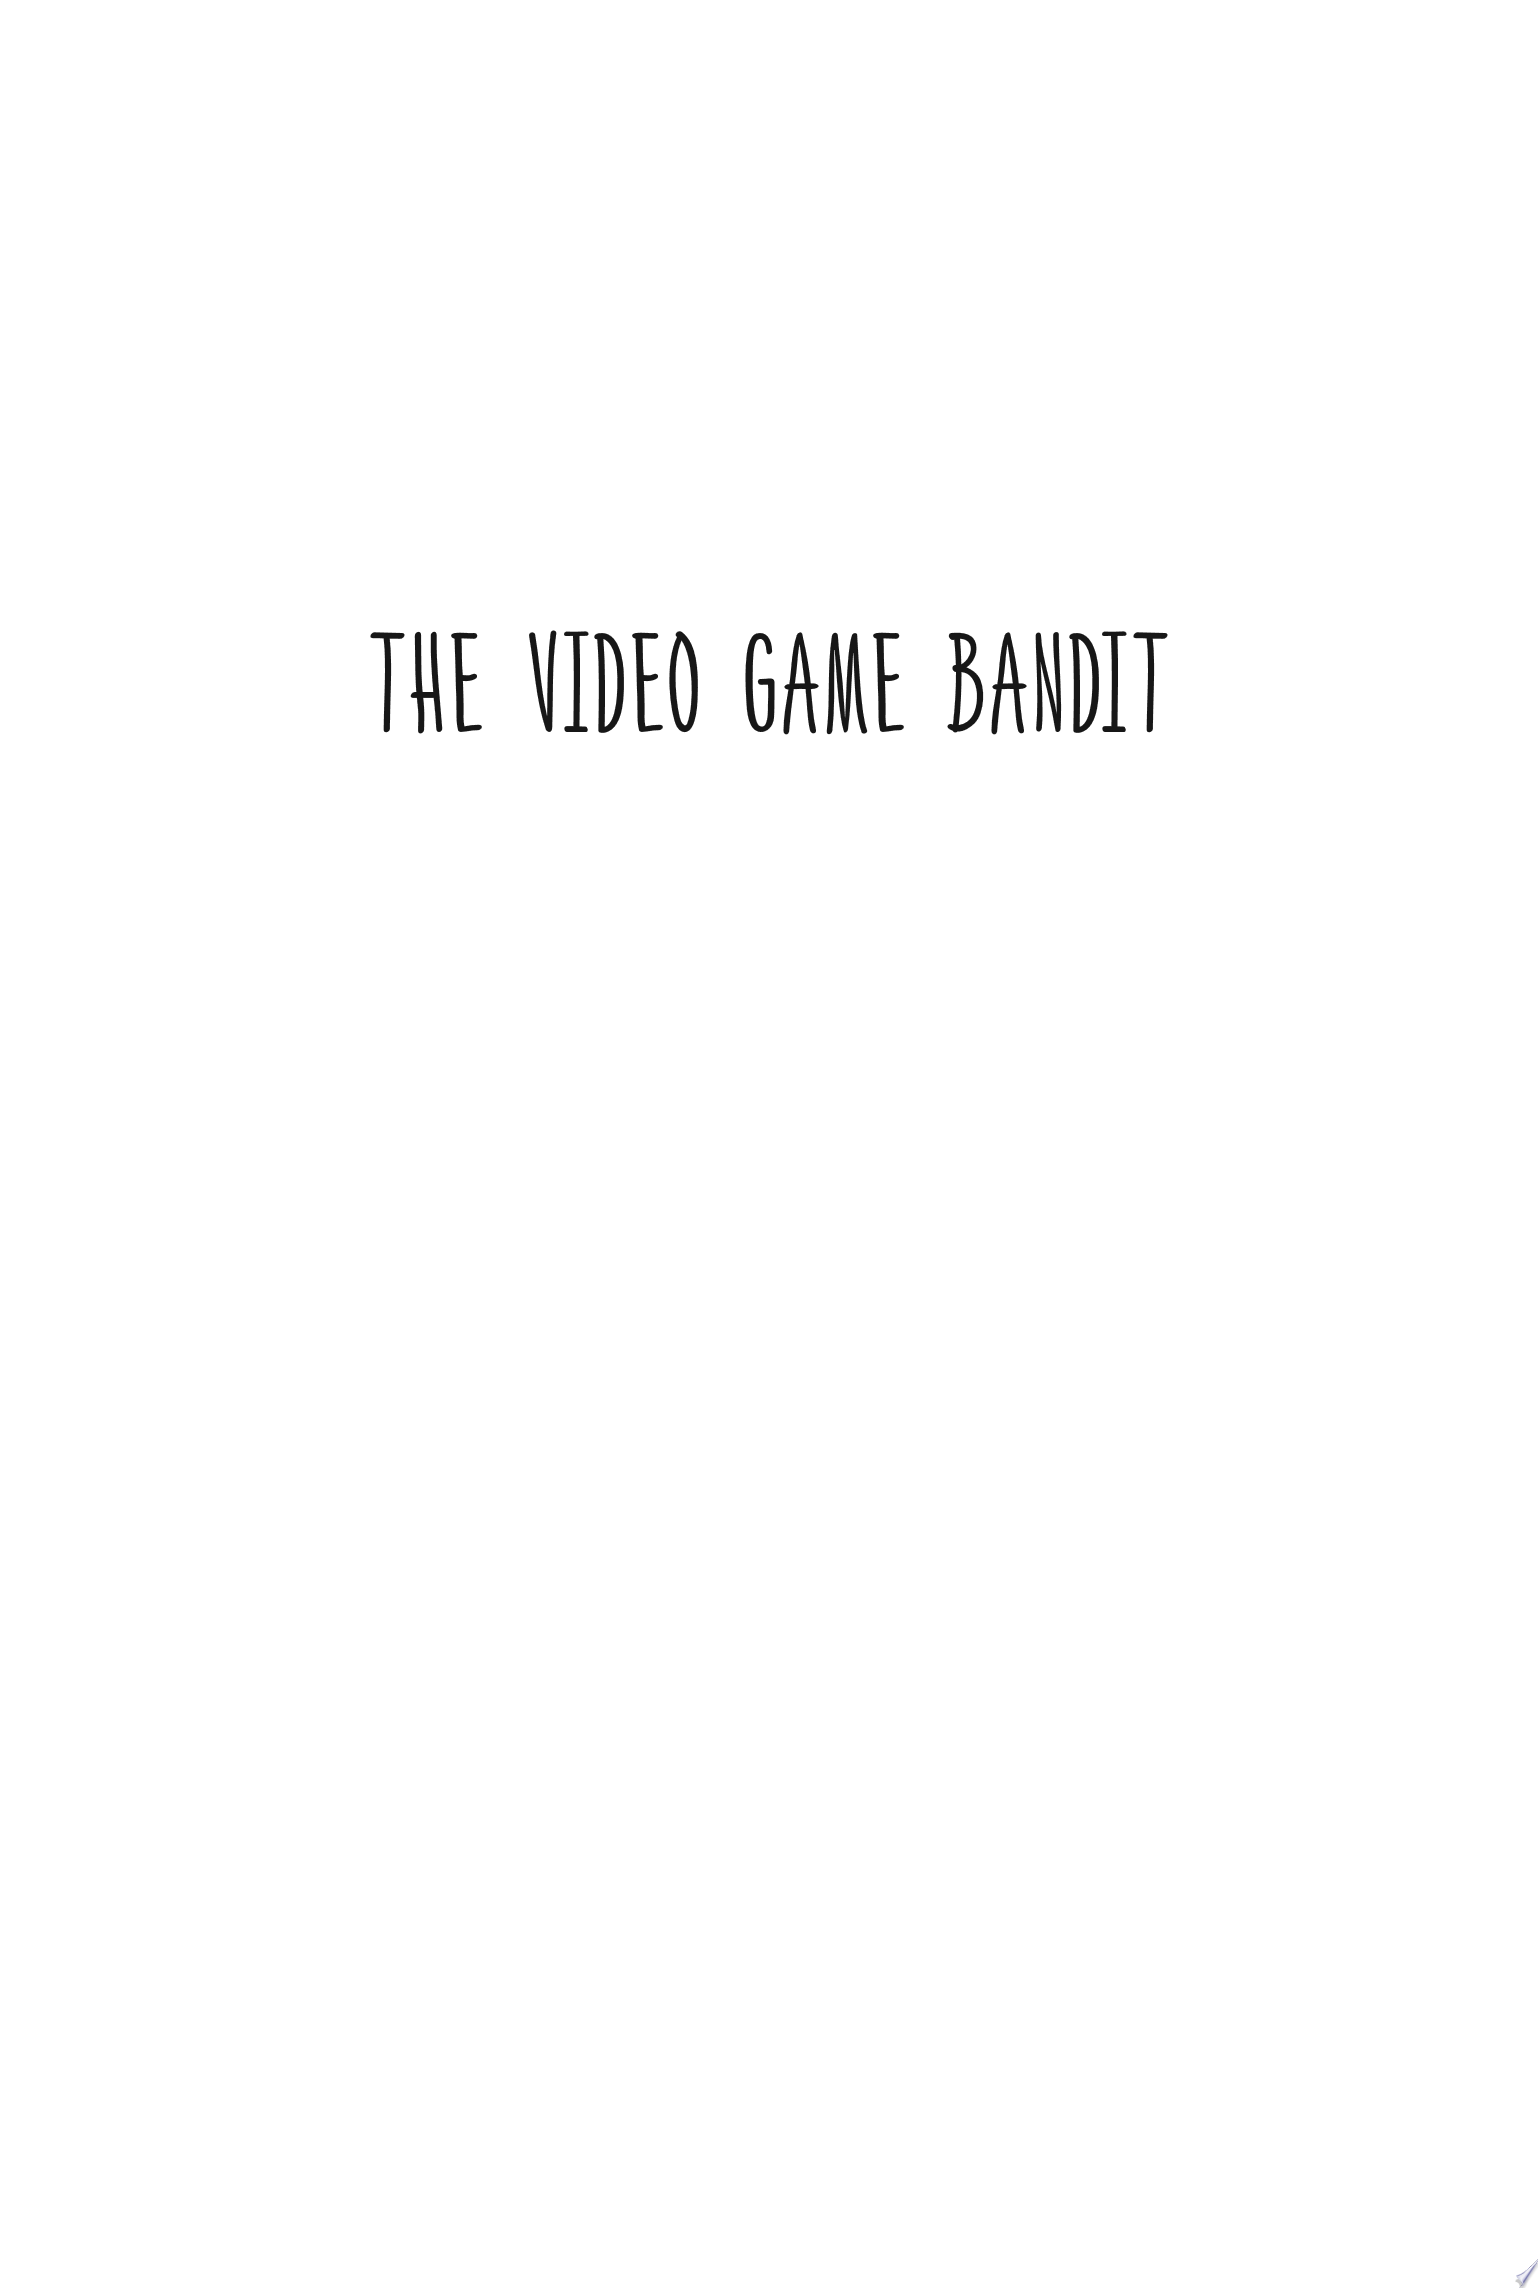 Image for "The Video Game Bandit"